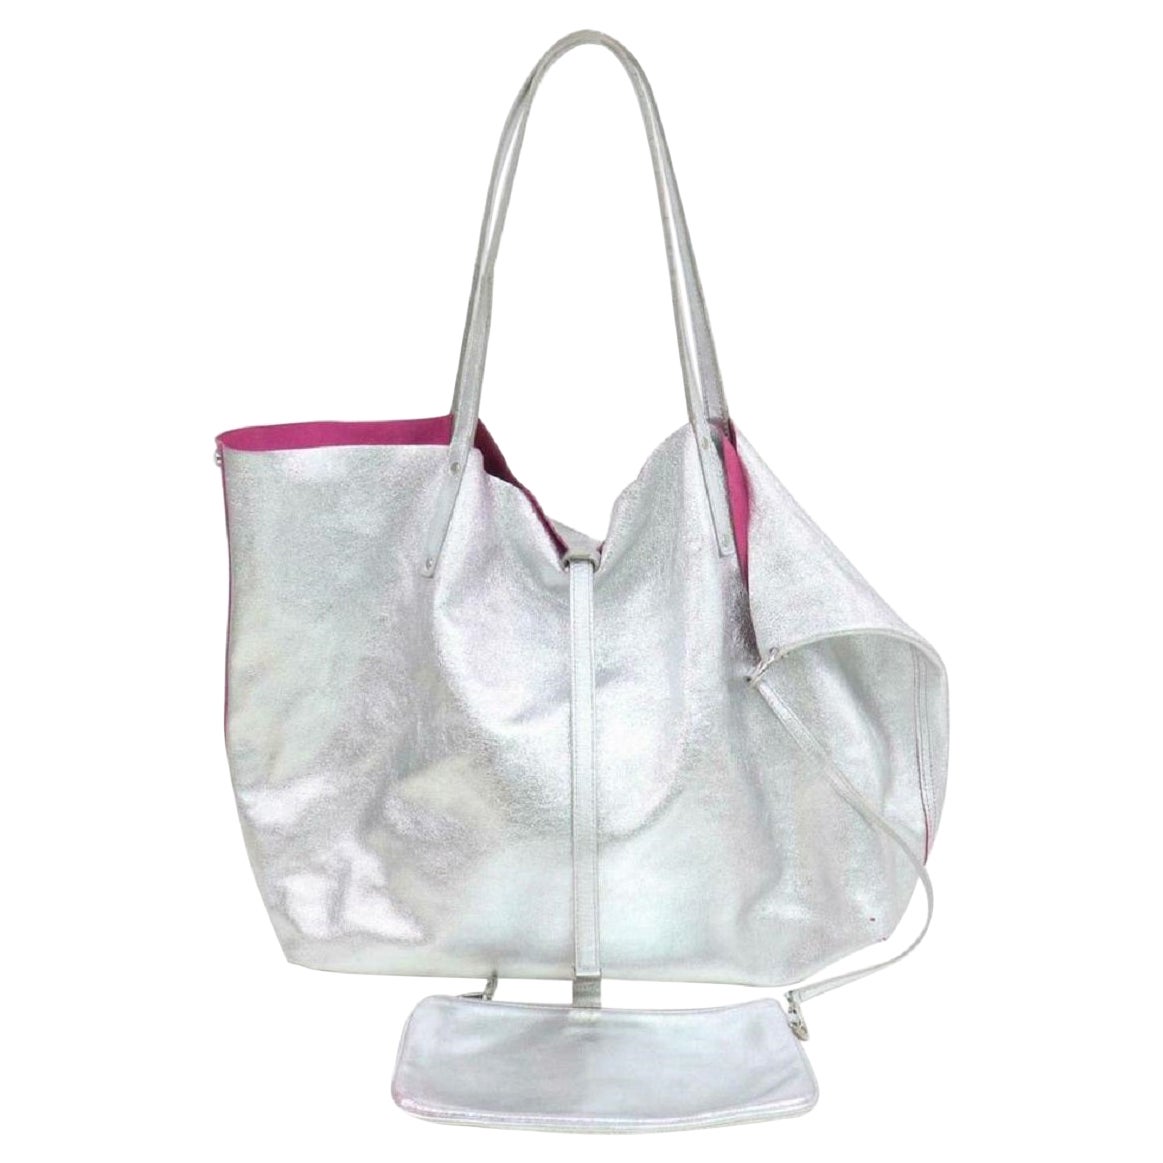 Tiffany & Co. Silver Reversible Shopper Tote with Pouch 871440 